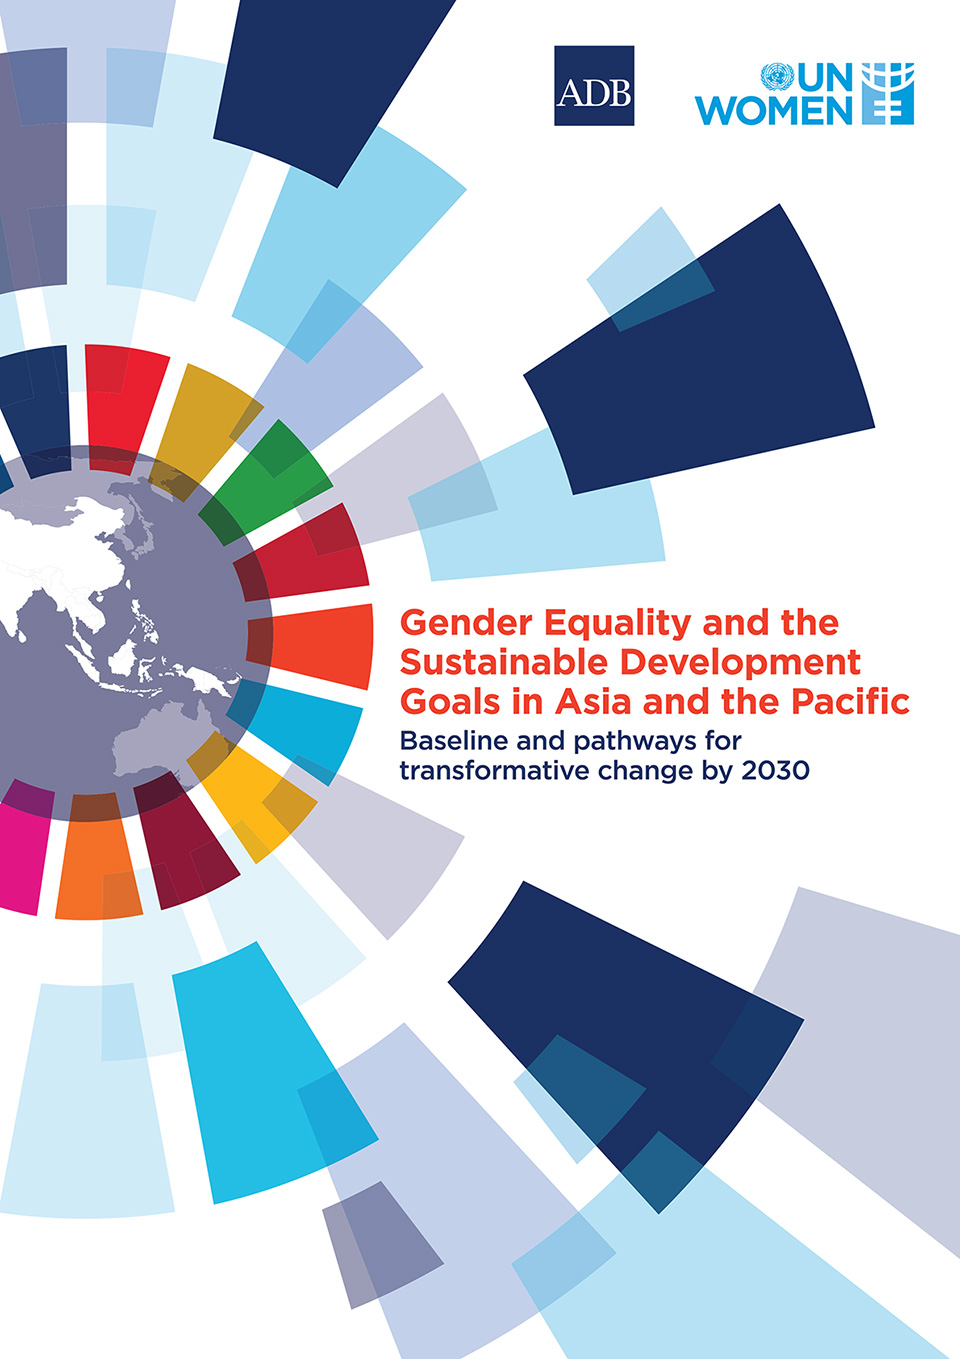 Gender Equality and the Sustainable Development Goals in Asia and the Paciﬁc  Asia-Pacific SDG Repor: t Baseline and pathways for transformative change by 2030